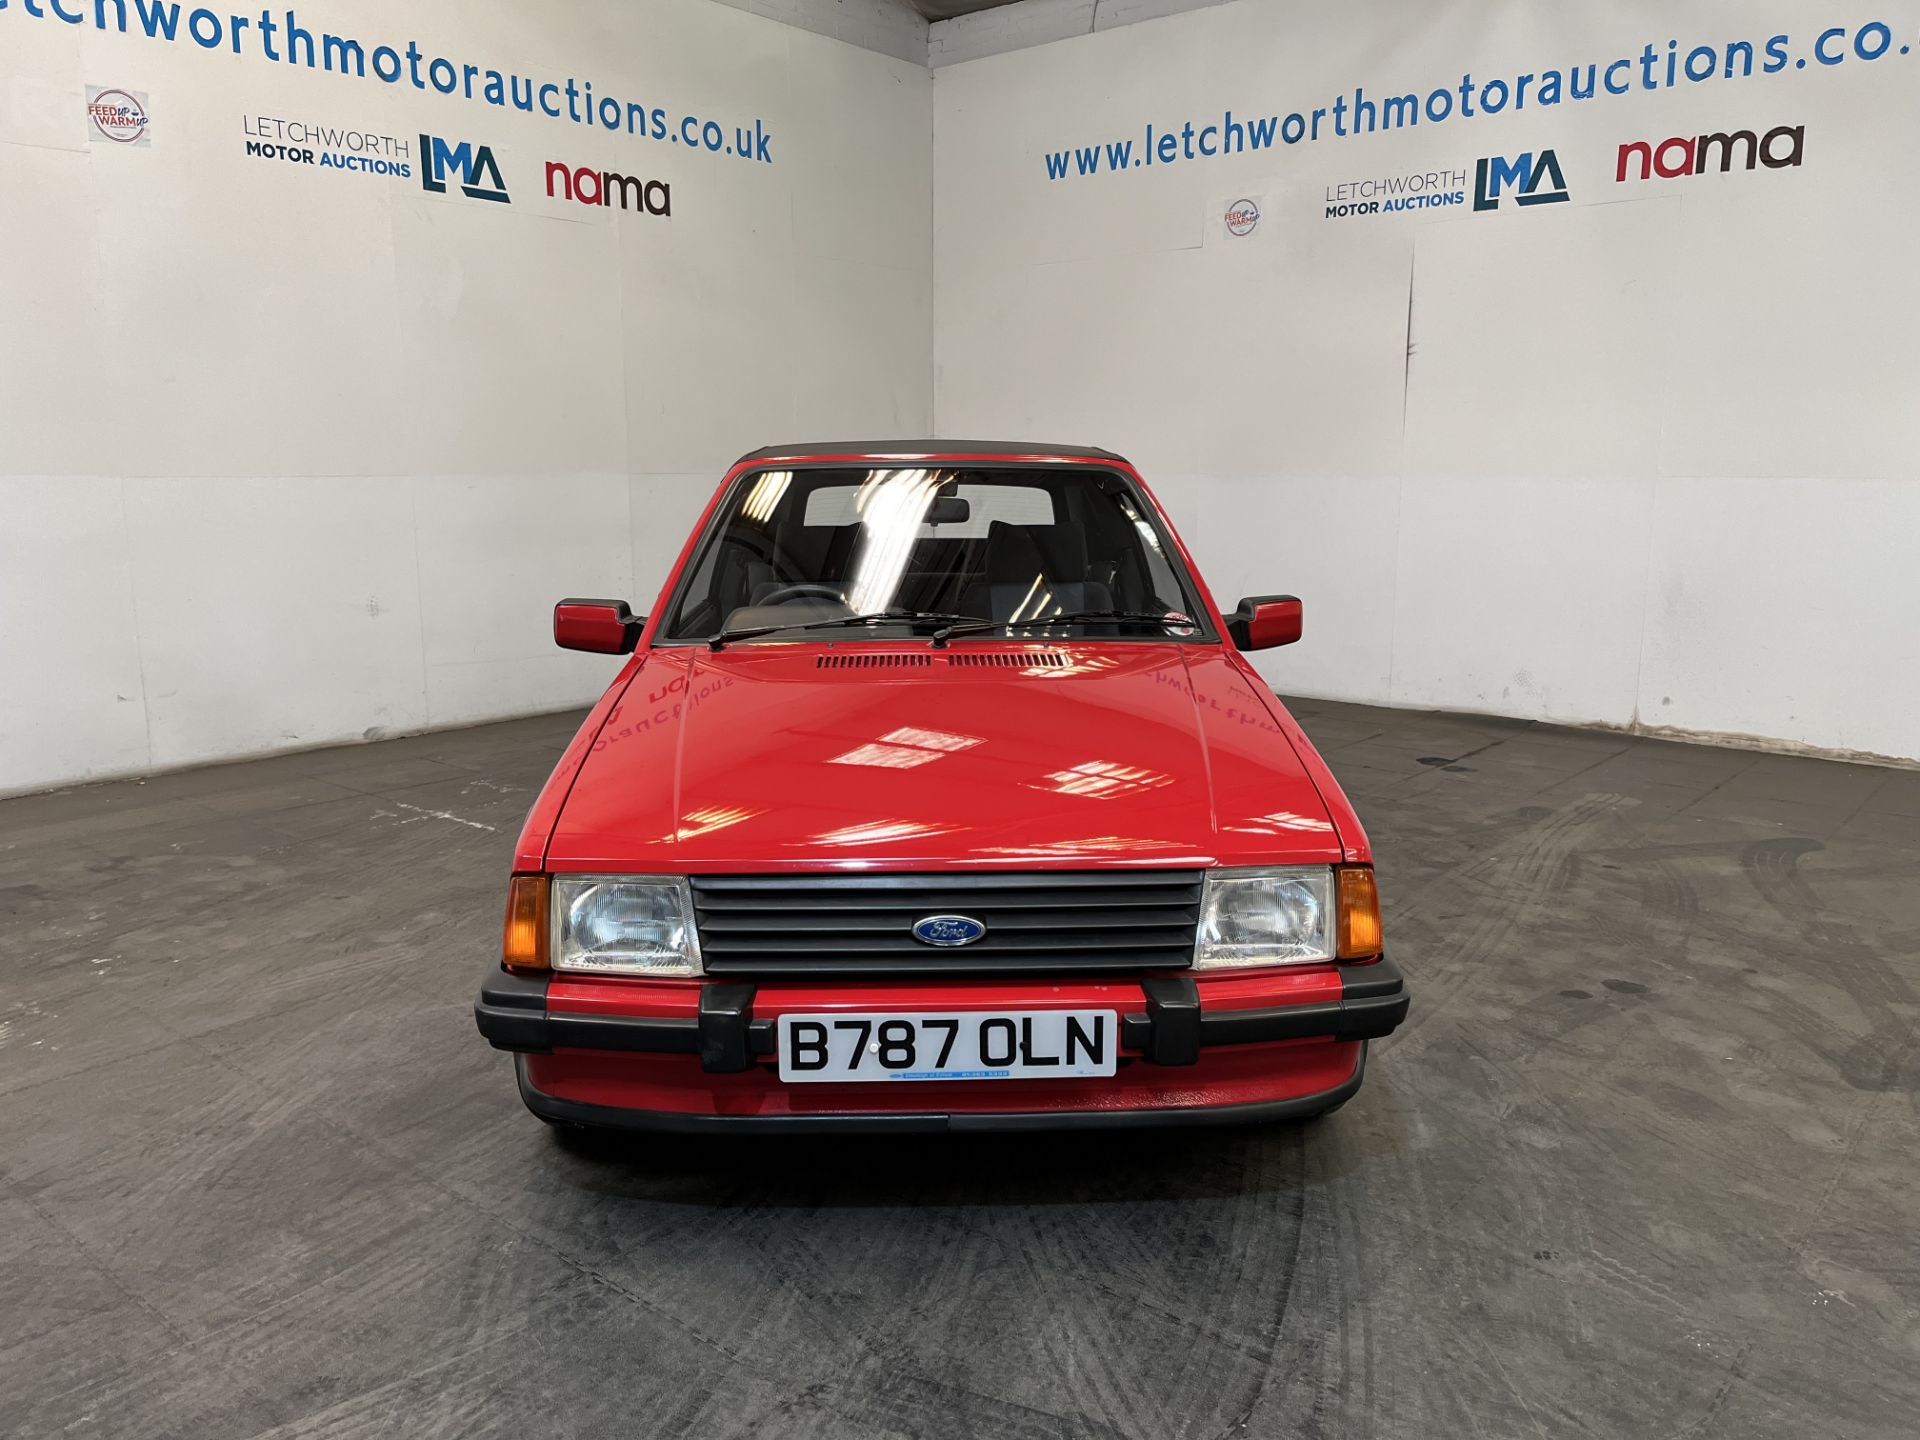 1985 Ford Escort 1.6i Cabriolet - 1597cc *ONE OWNER FROM NEW* - Bild 3 aus 24